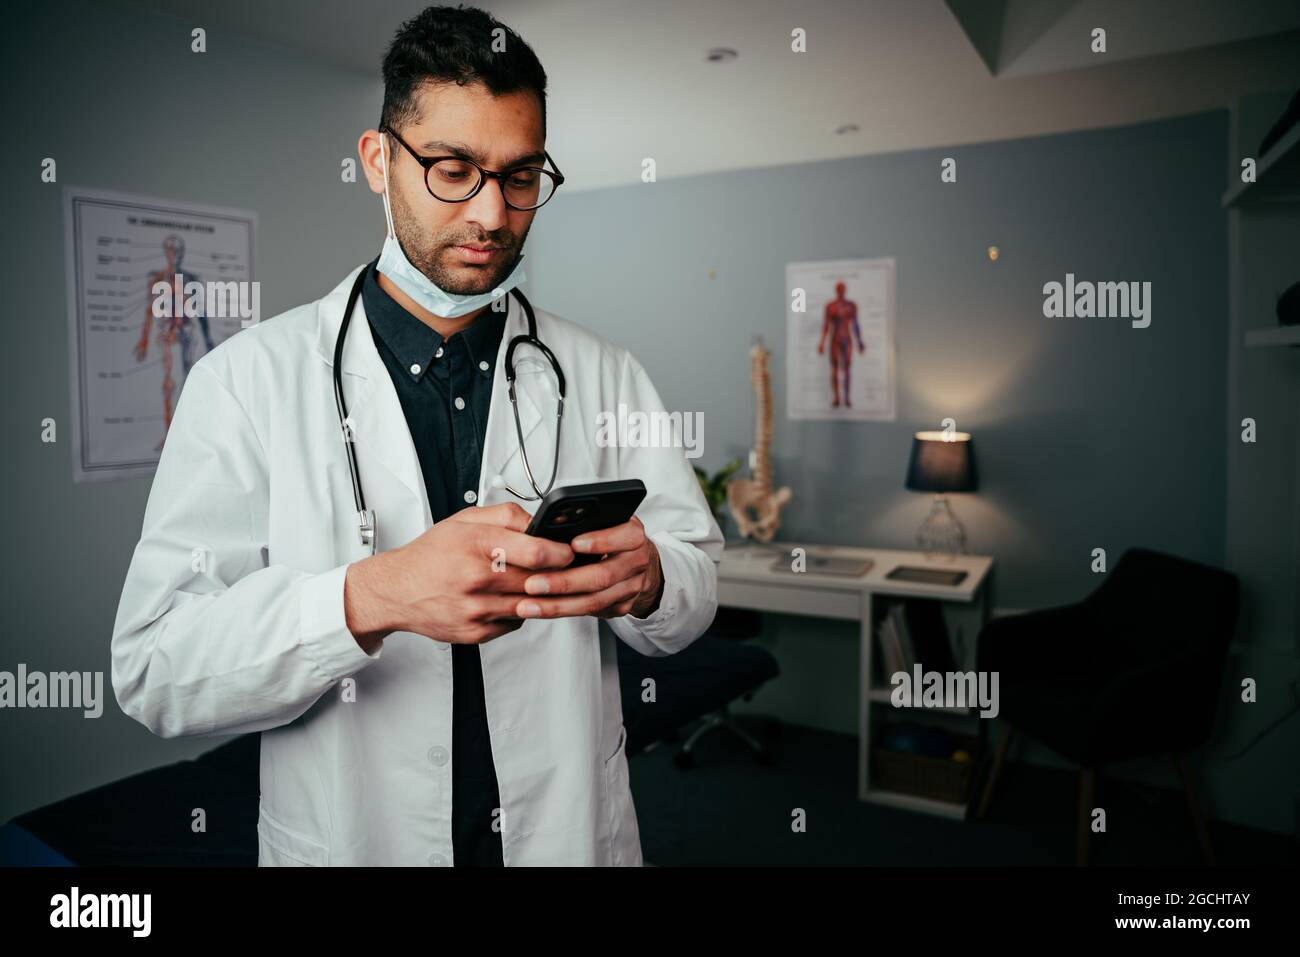 Mixed race male nurse standing in doctors office texting on cellular device Stock Photo